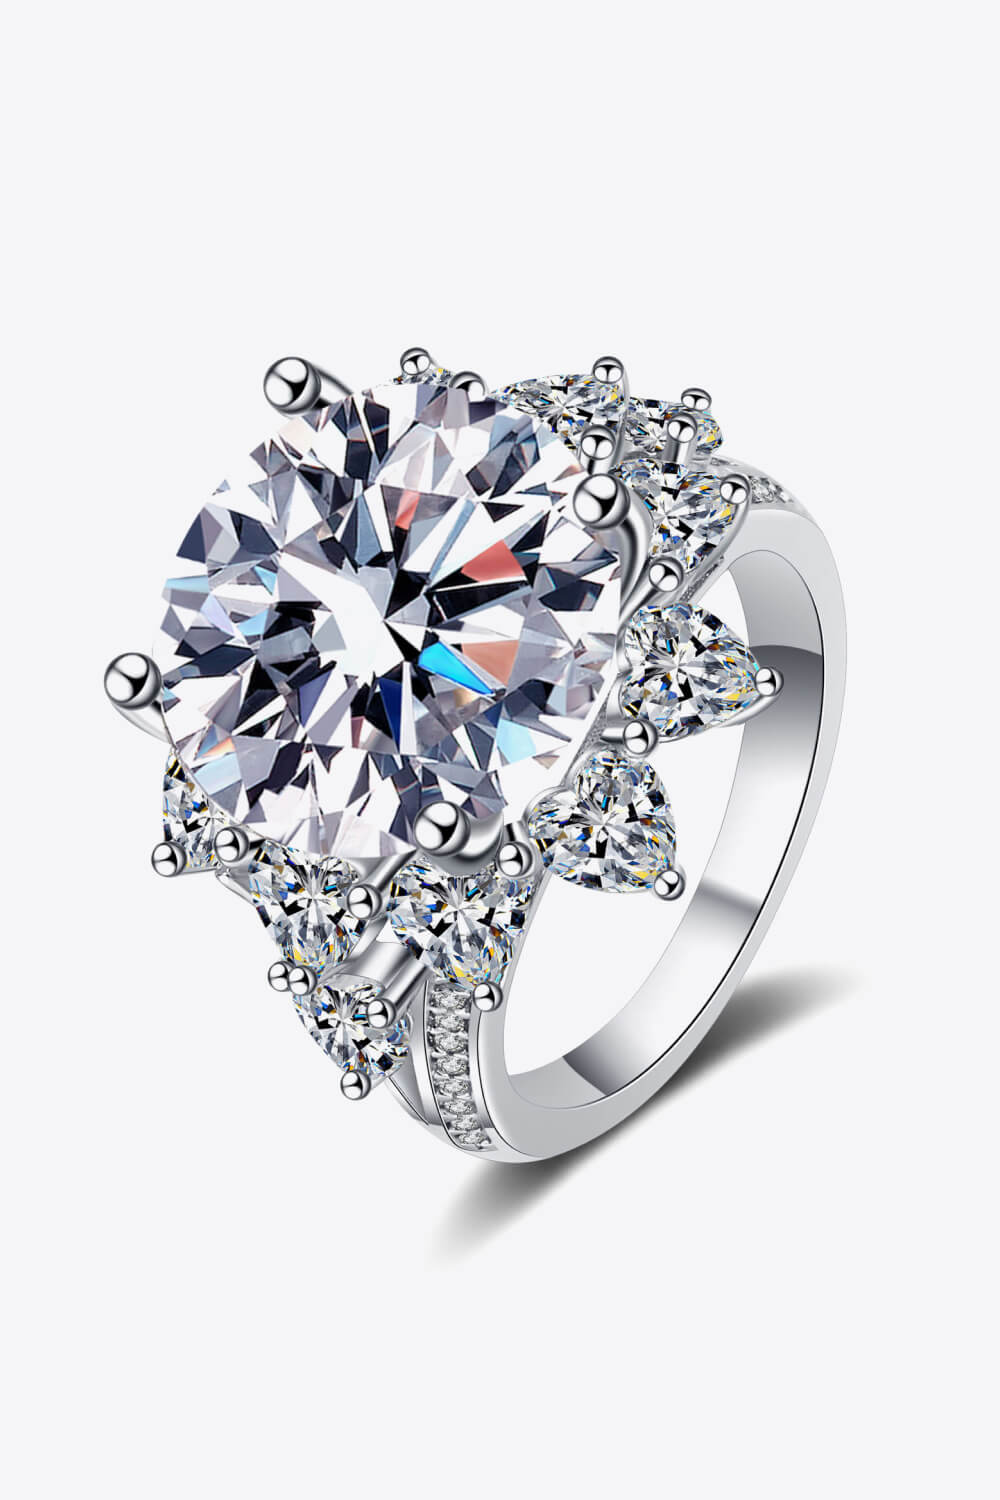 10 Carat Moissanite Flower-Shaped Ring (Rhodium Over Pure Sterling Silver) - Sparkala